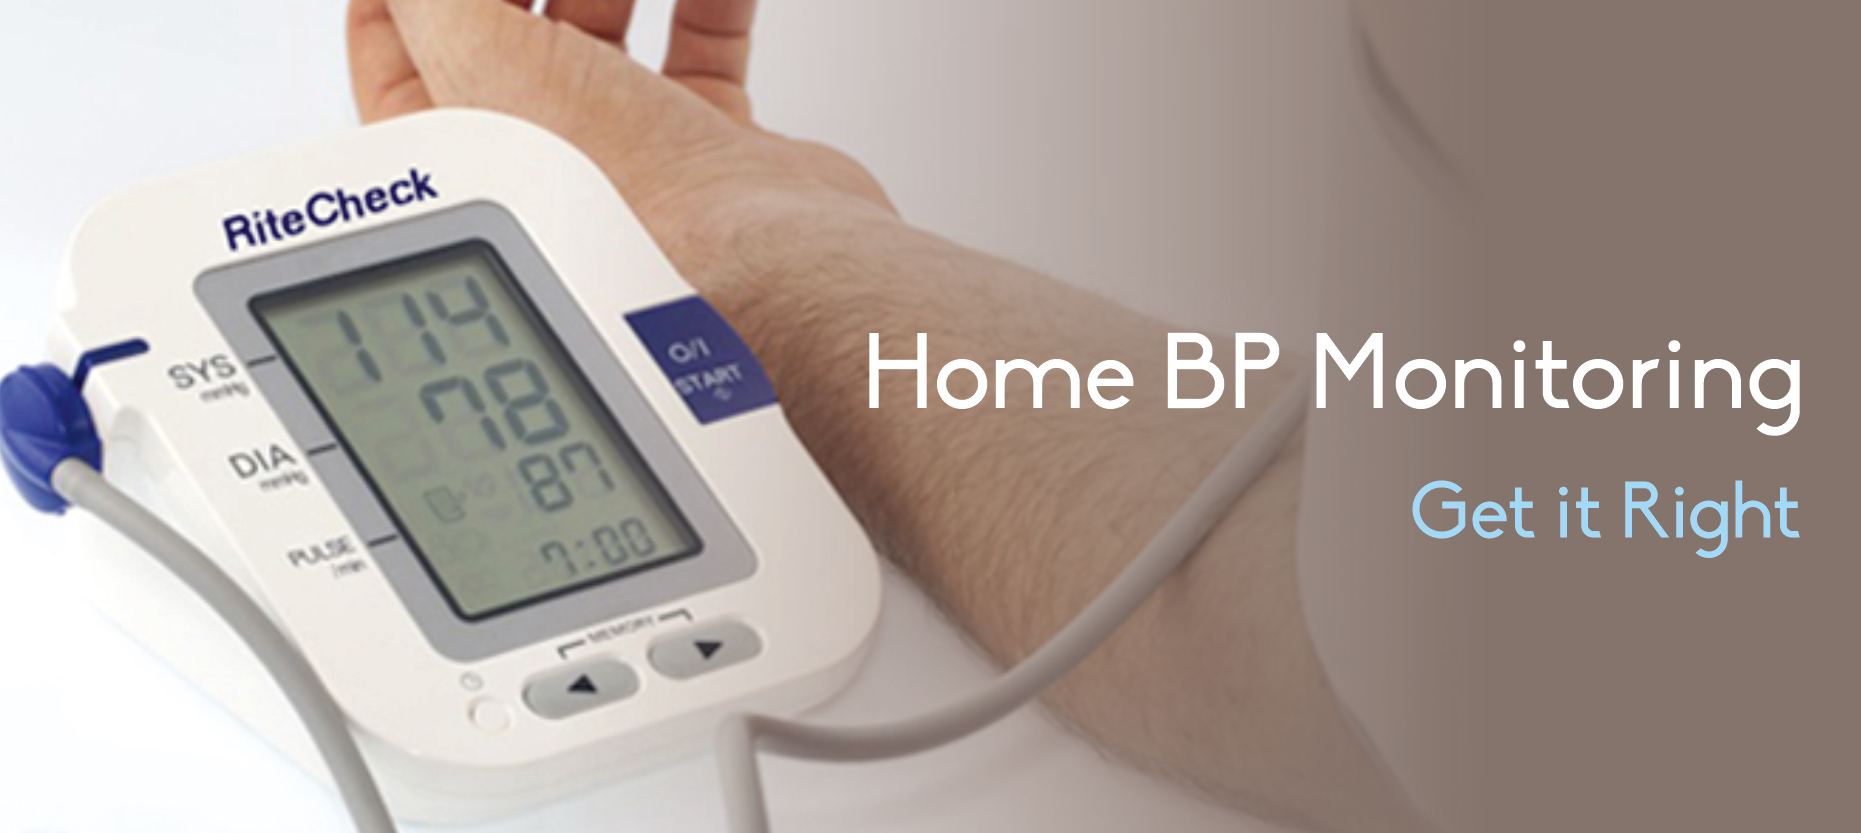 Home BP Monitoring – Get it right?